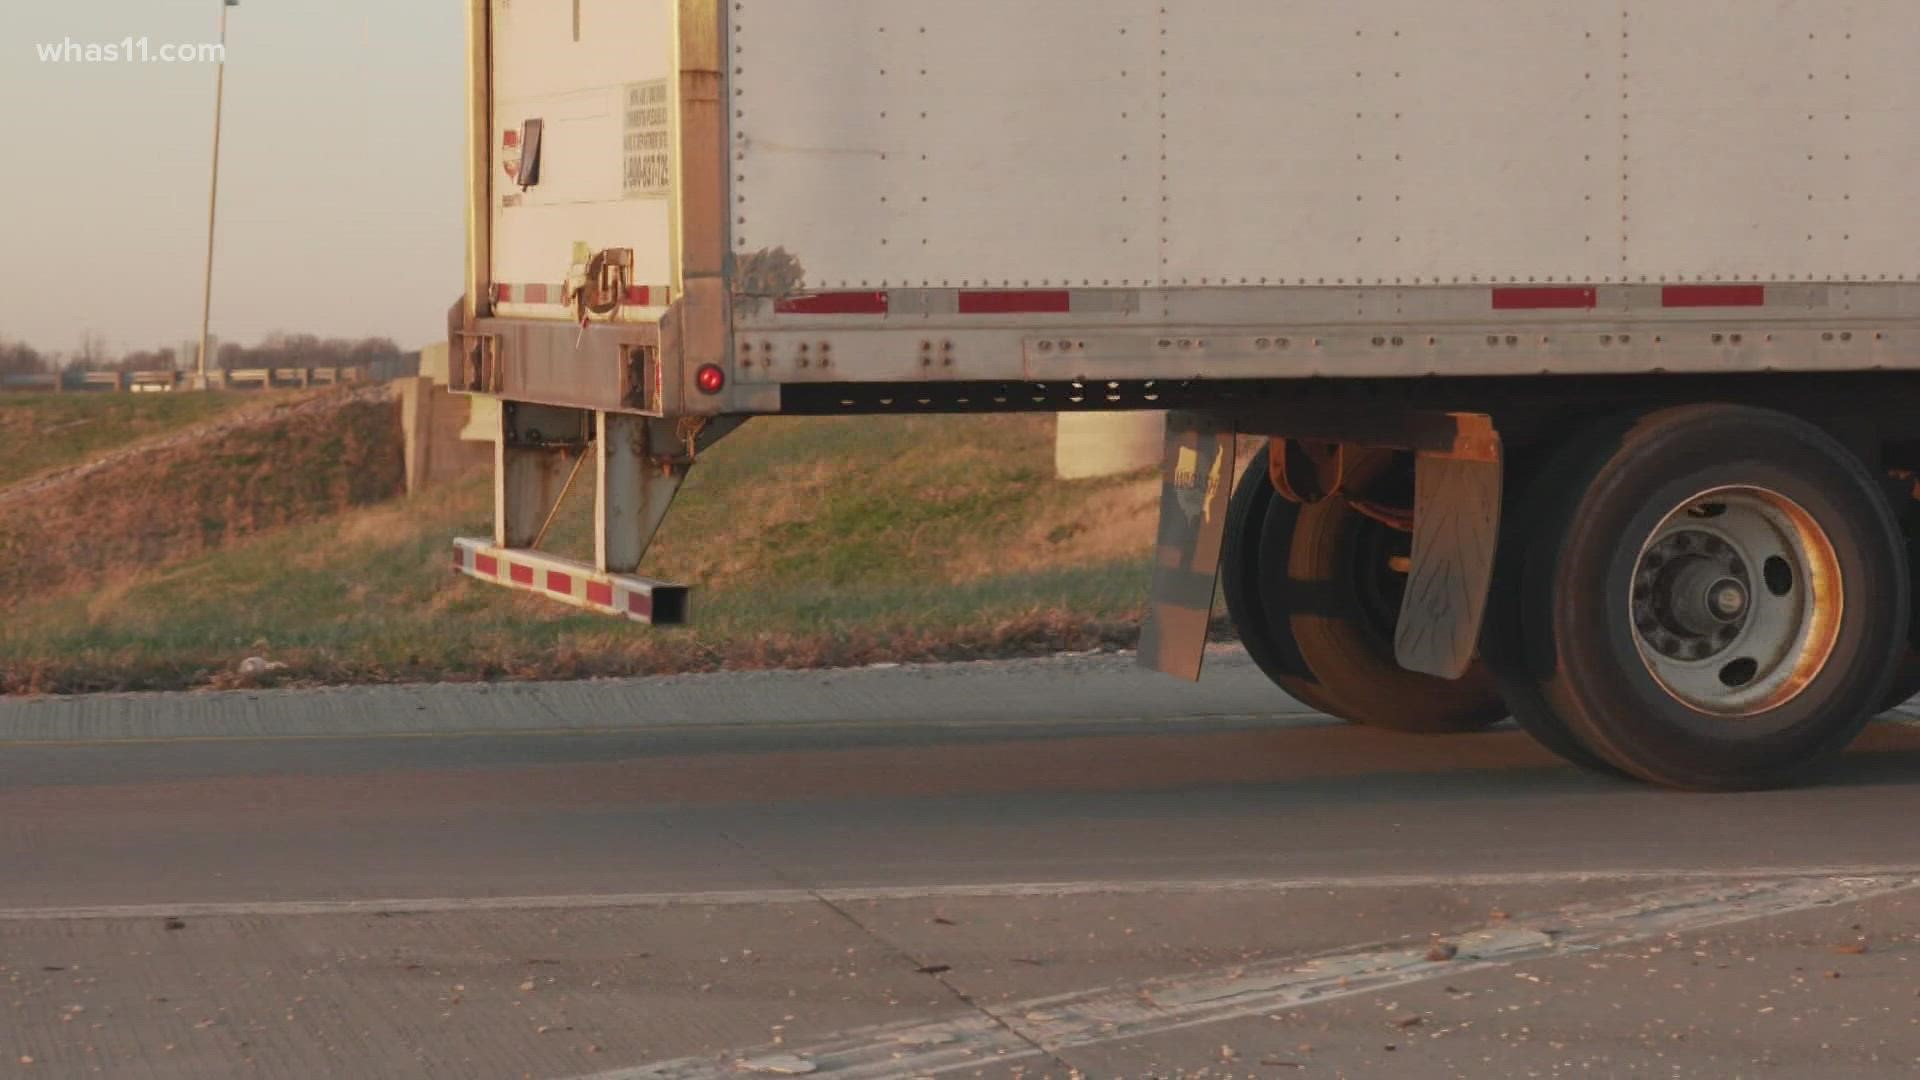 Starting today, trucking companies and truck drivers can face hefty fines if those rear guards are in bad shape and therefore won't really do much good in preventing